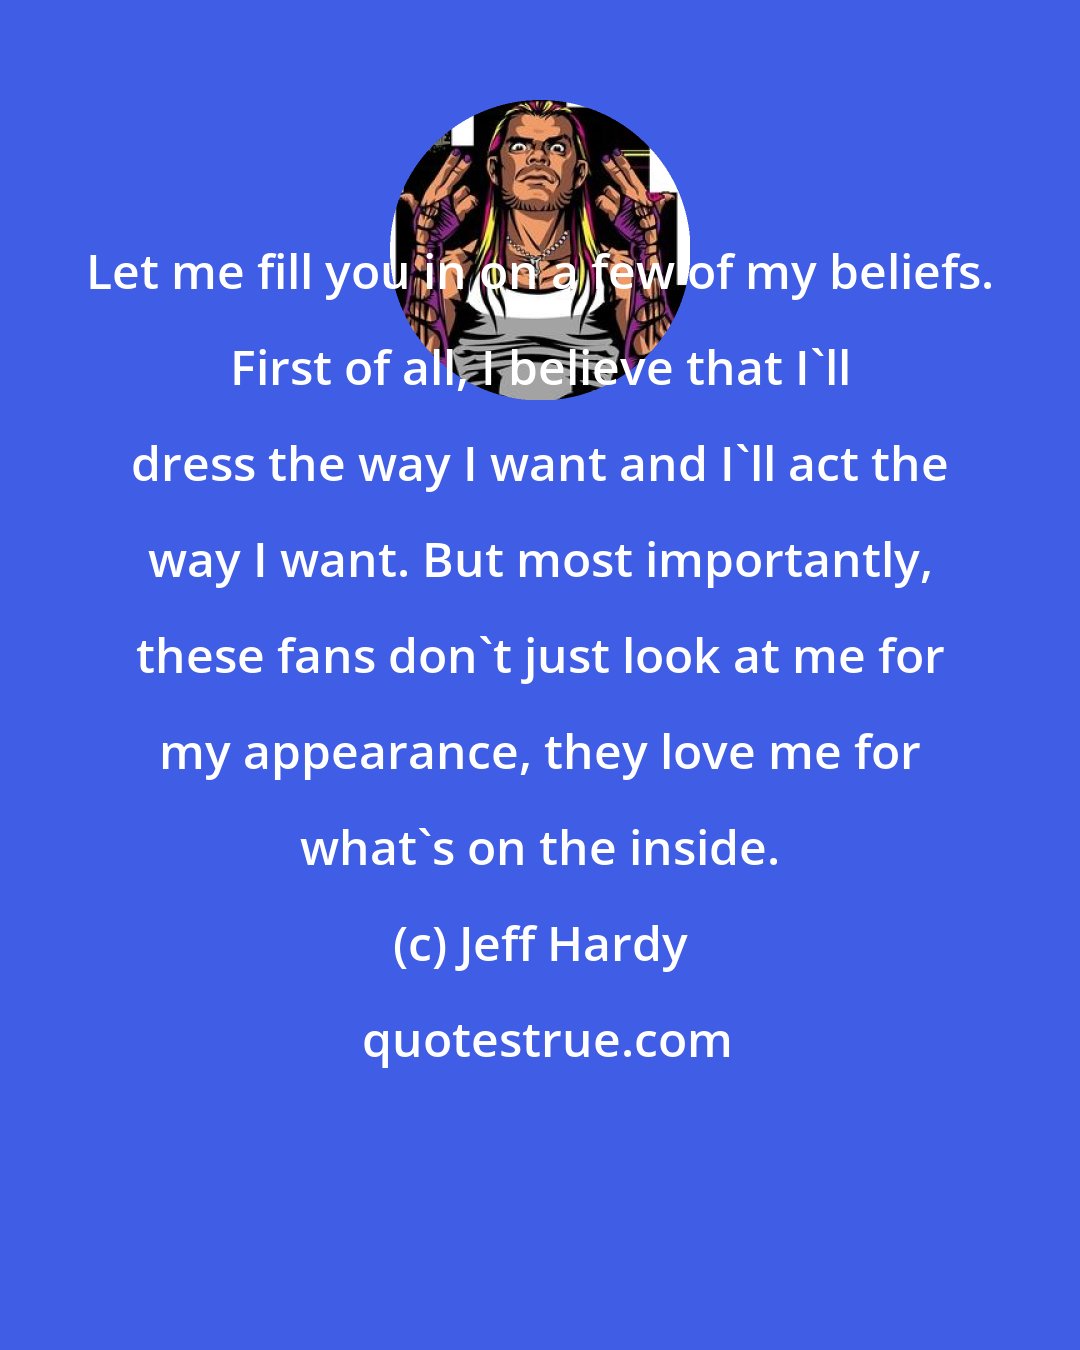 Jeff Hardy: Let me fill you in on a few of my beliefs. First of all, I believe that I'll dress the way I want and I'll act the way I want. But most importantly, these fans don't just look at me for my appearance, they love me for what's on the inside.